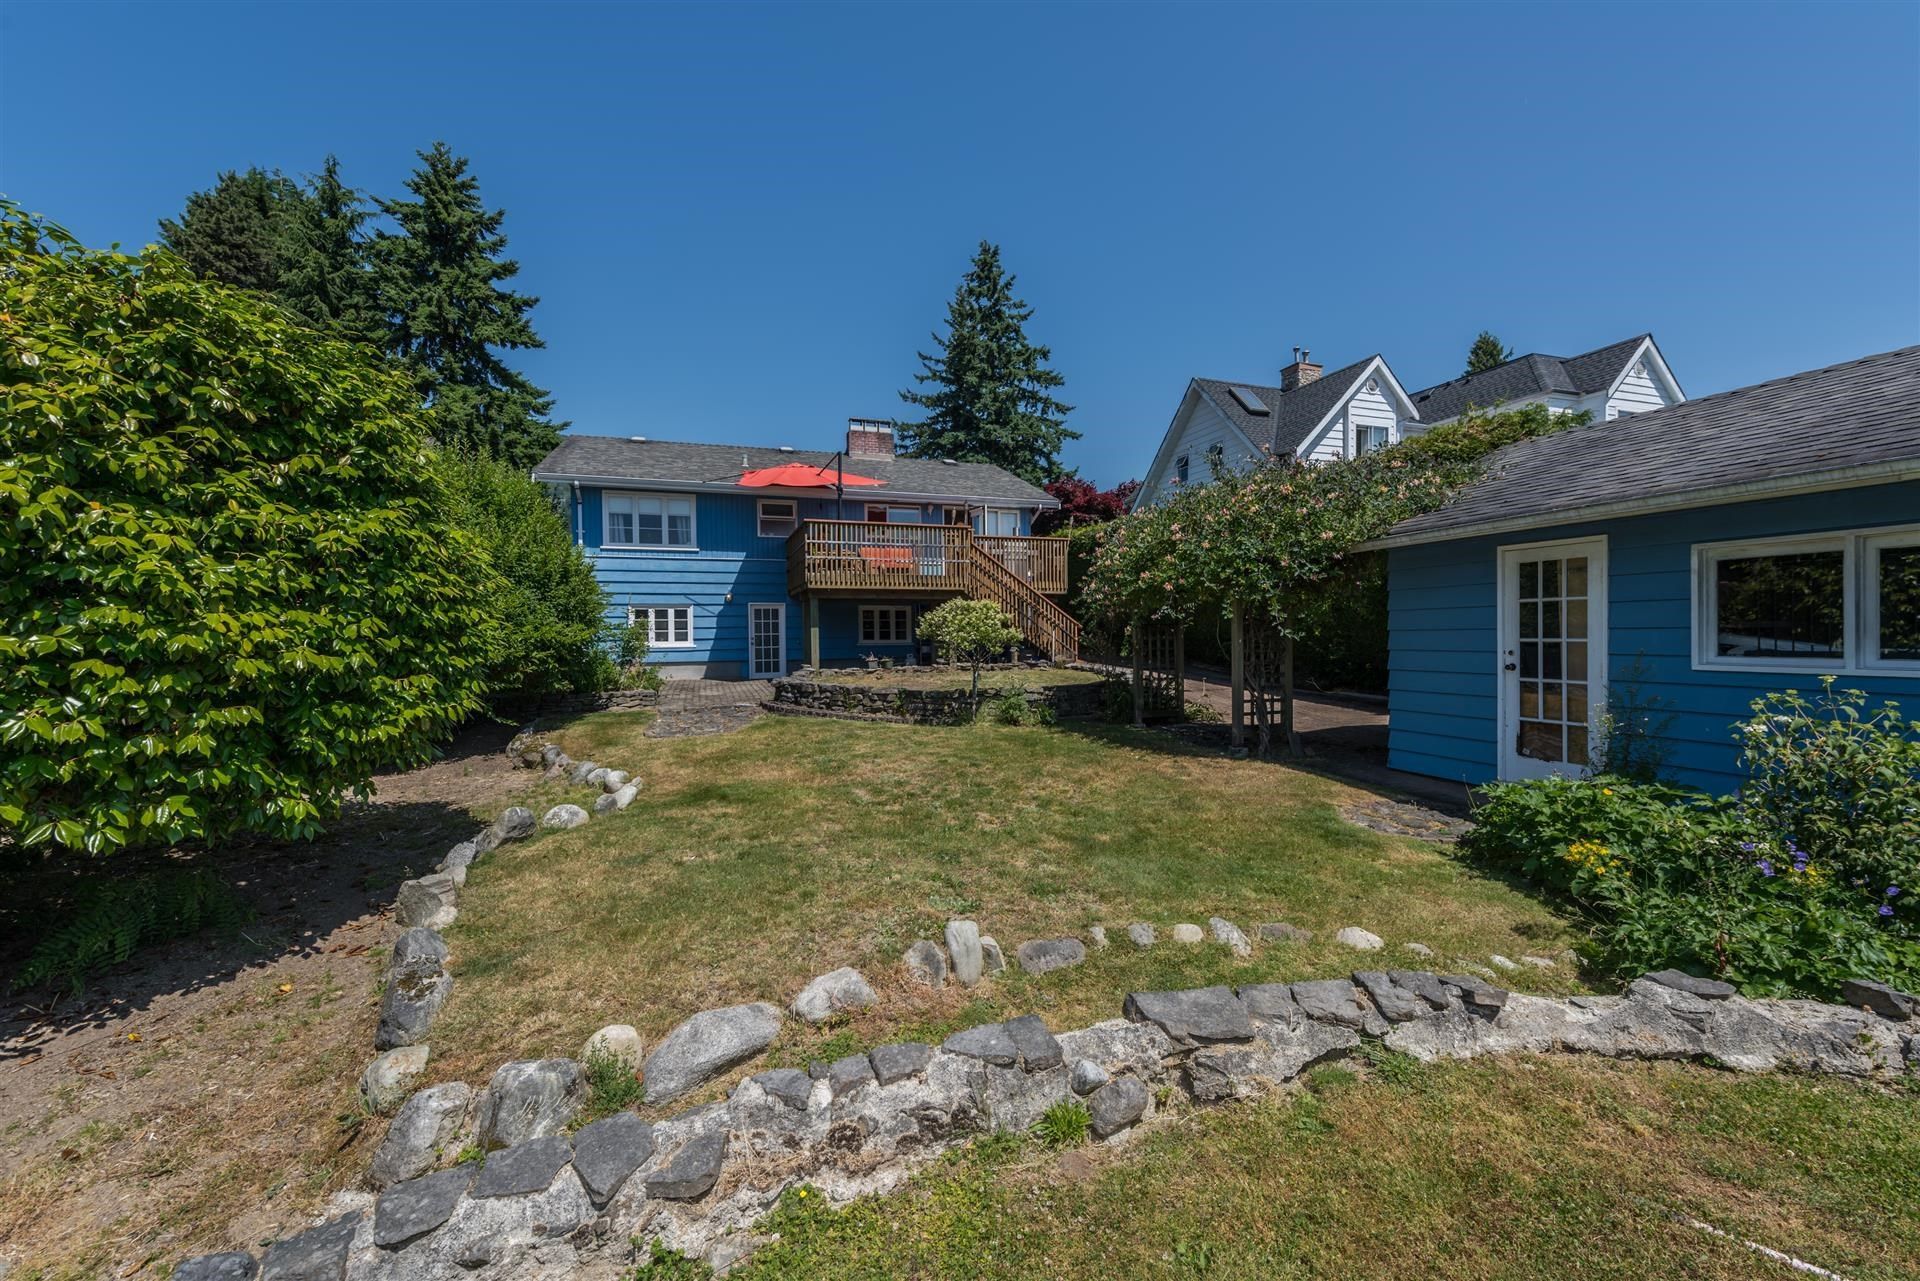 Photo 19: Photos: 2346 HAYWOOD Avenue in West Vancouver: Dundarave House for sale : MLS®# R2615816